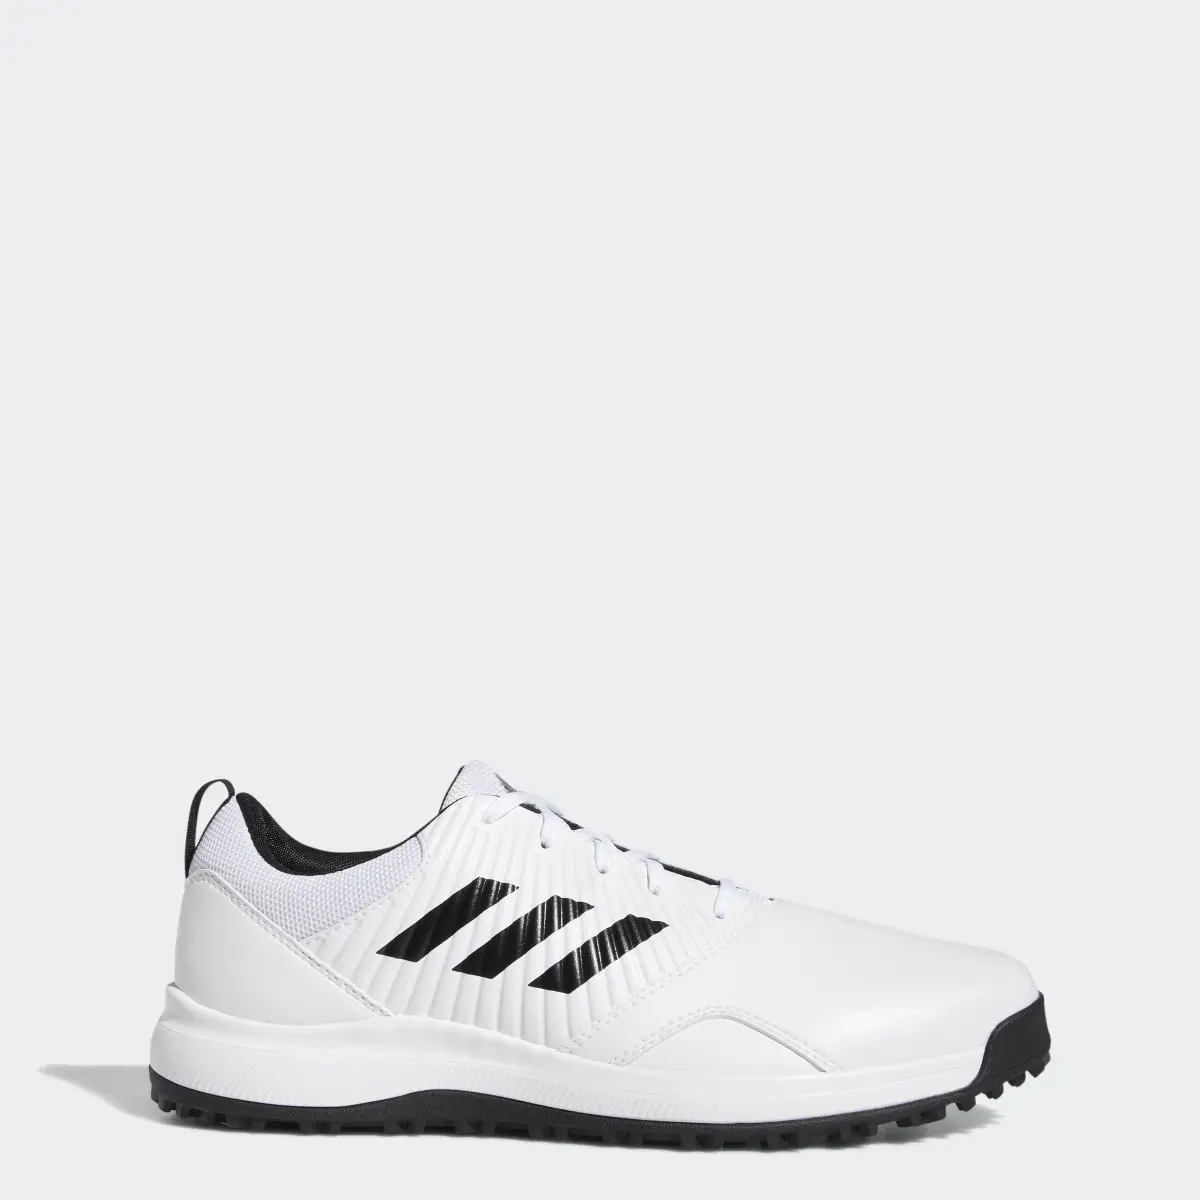 Adidas Chaussure CP Traxion Spikeless. 1